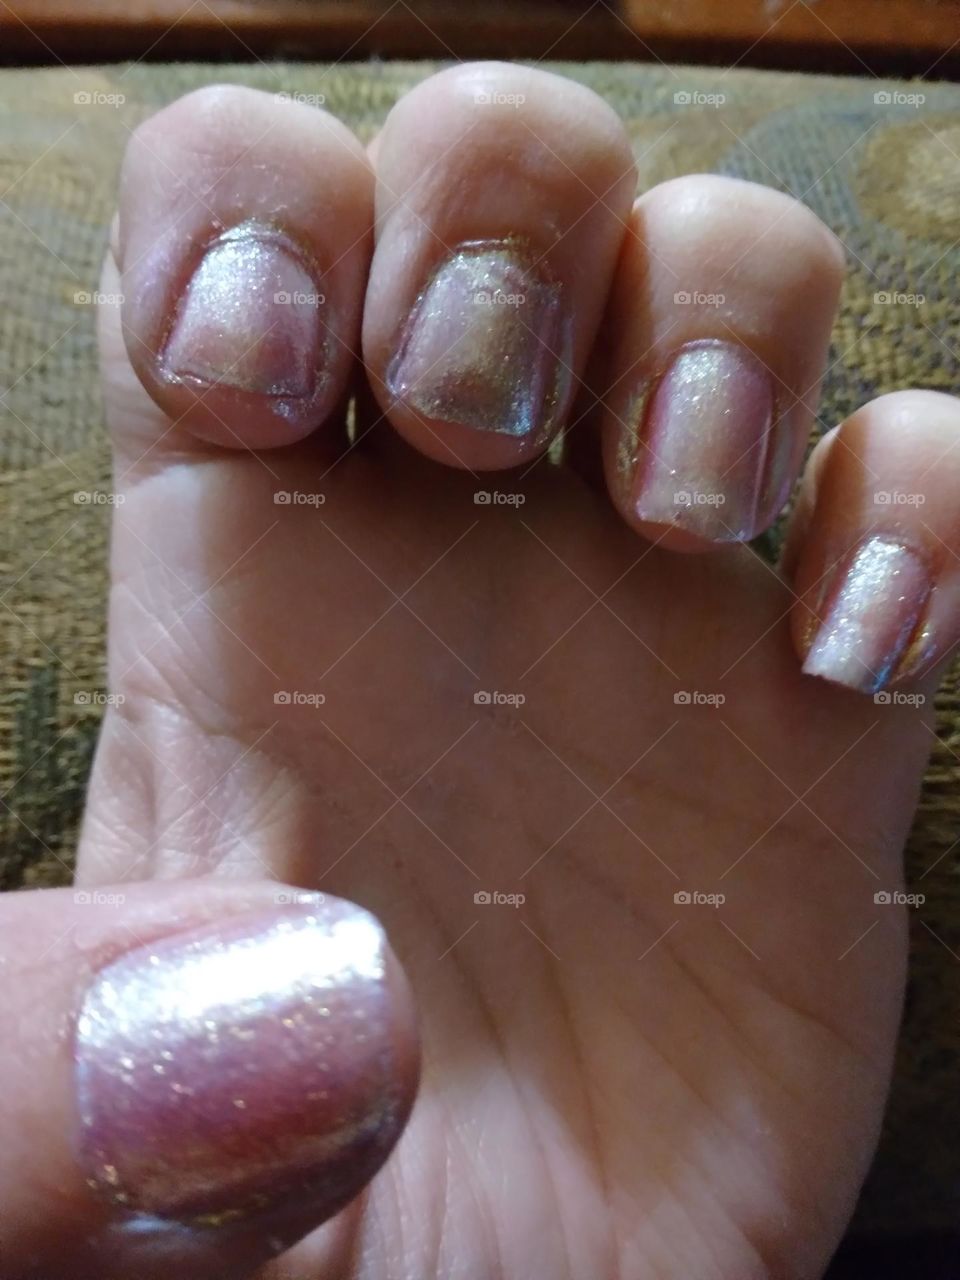 My Sparkle Like A Unicorn Nails from Nails Inc. London